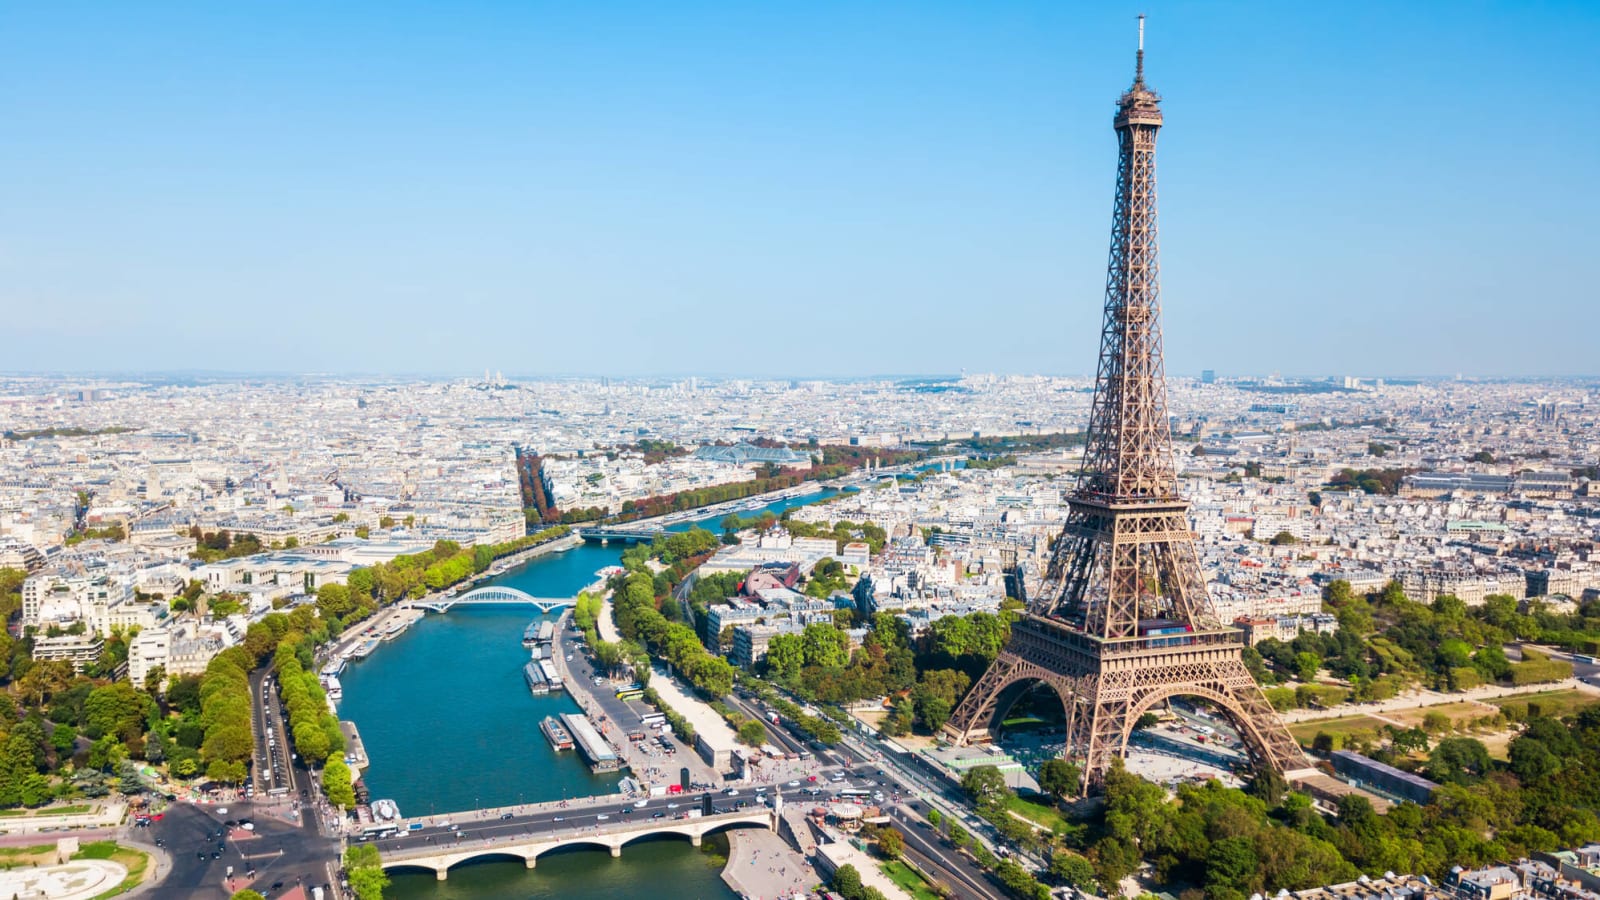 The 20 things you must do in Paris